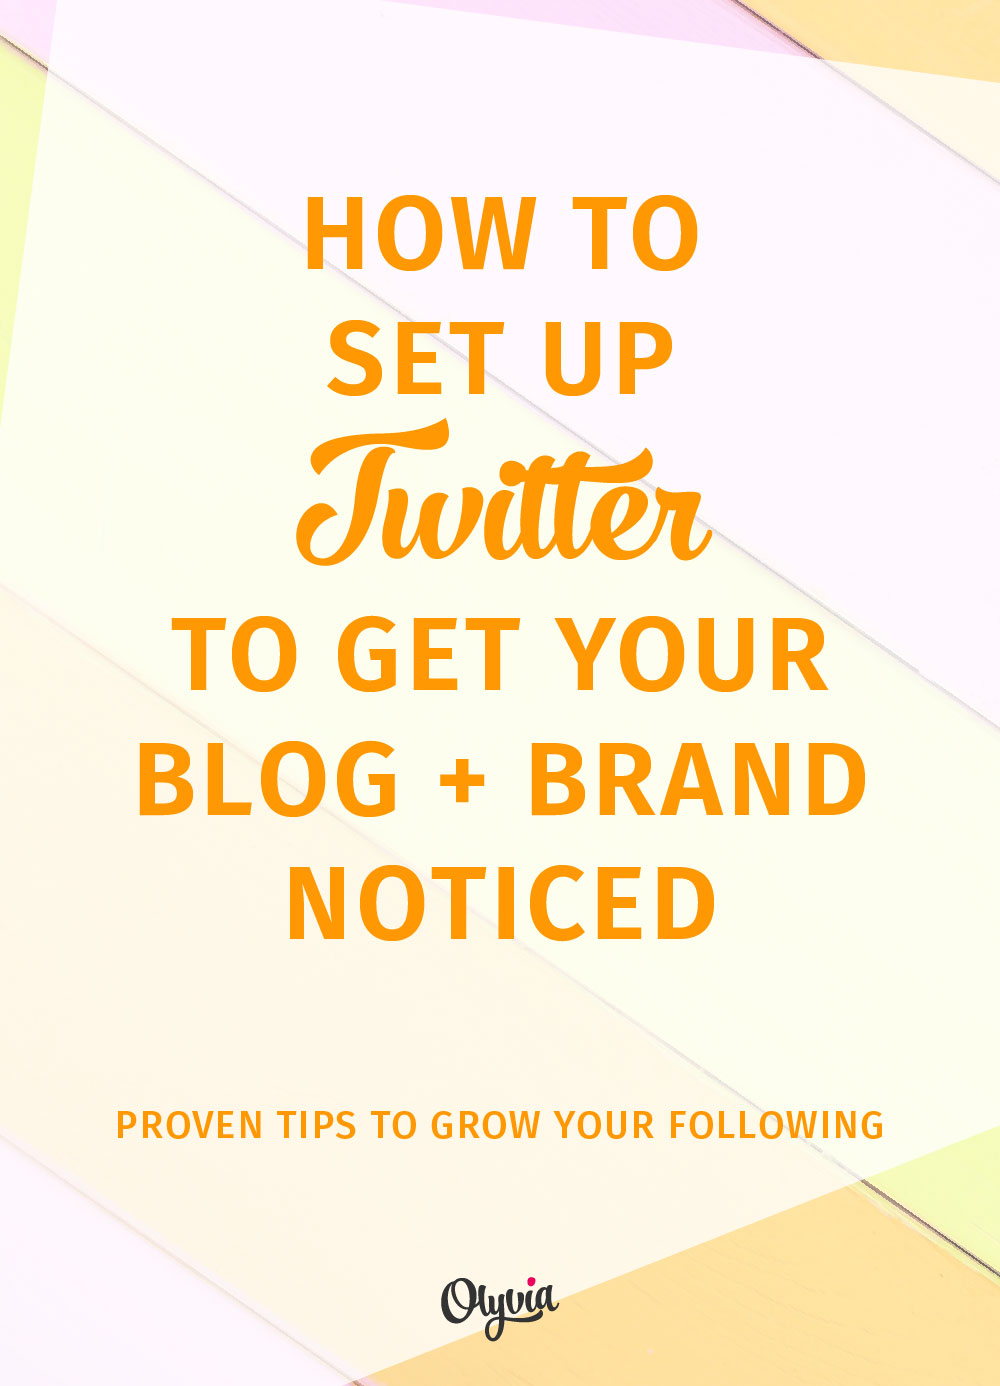 Simple, sleaze-free tips to getting noticed on Twitter + a video tutorial.